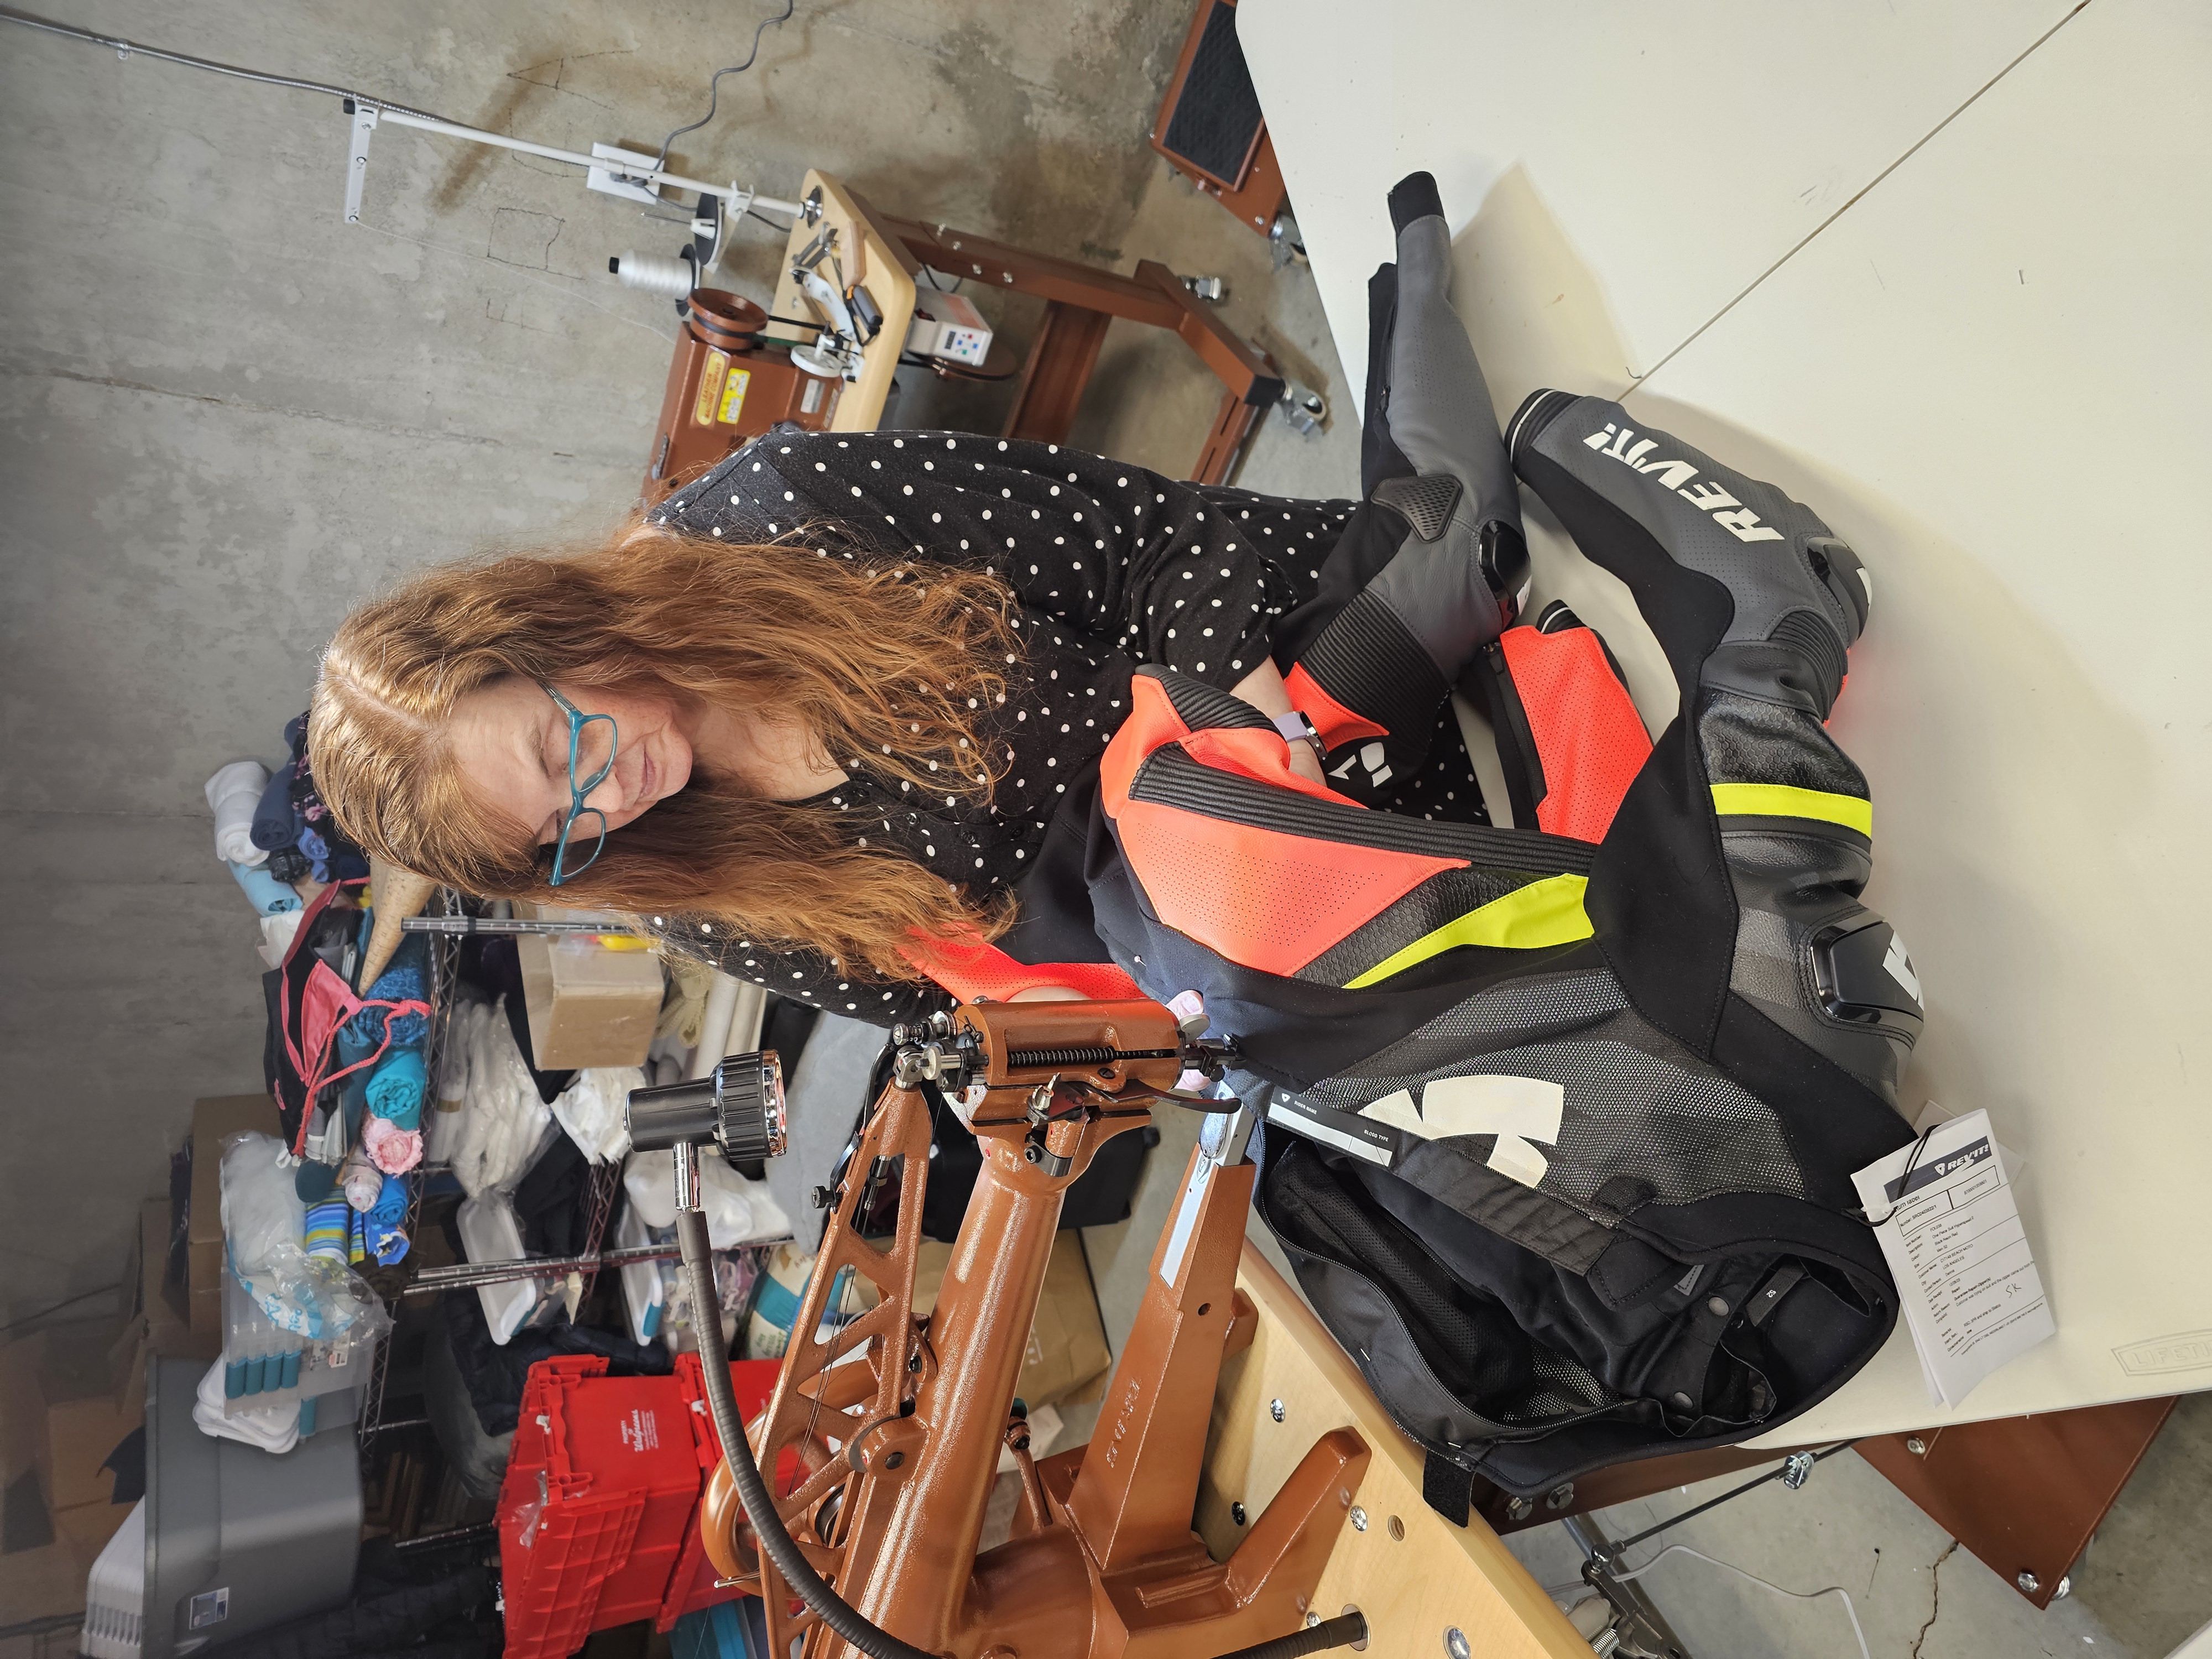 Nicole repairing a motorcycle outfit